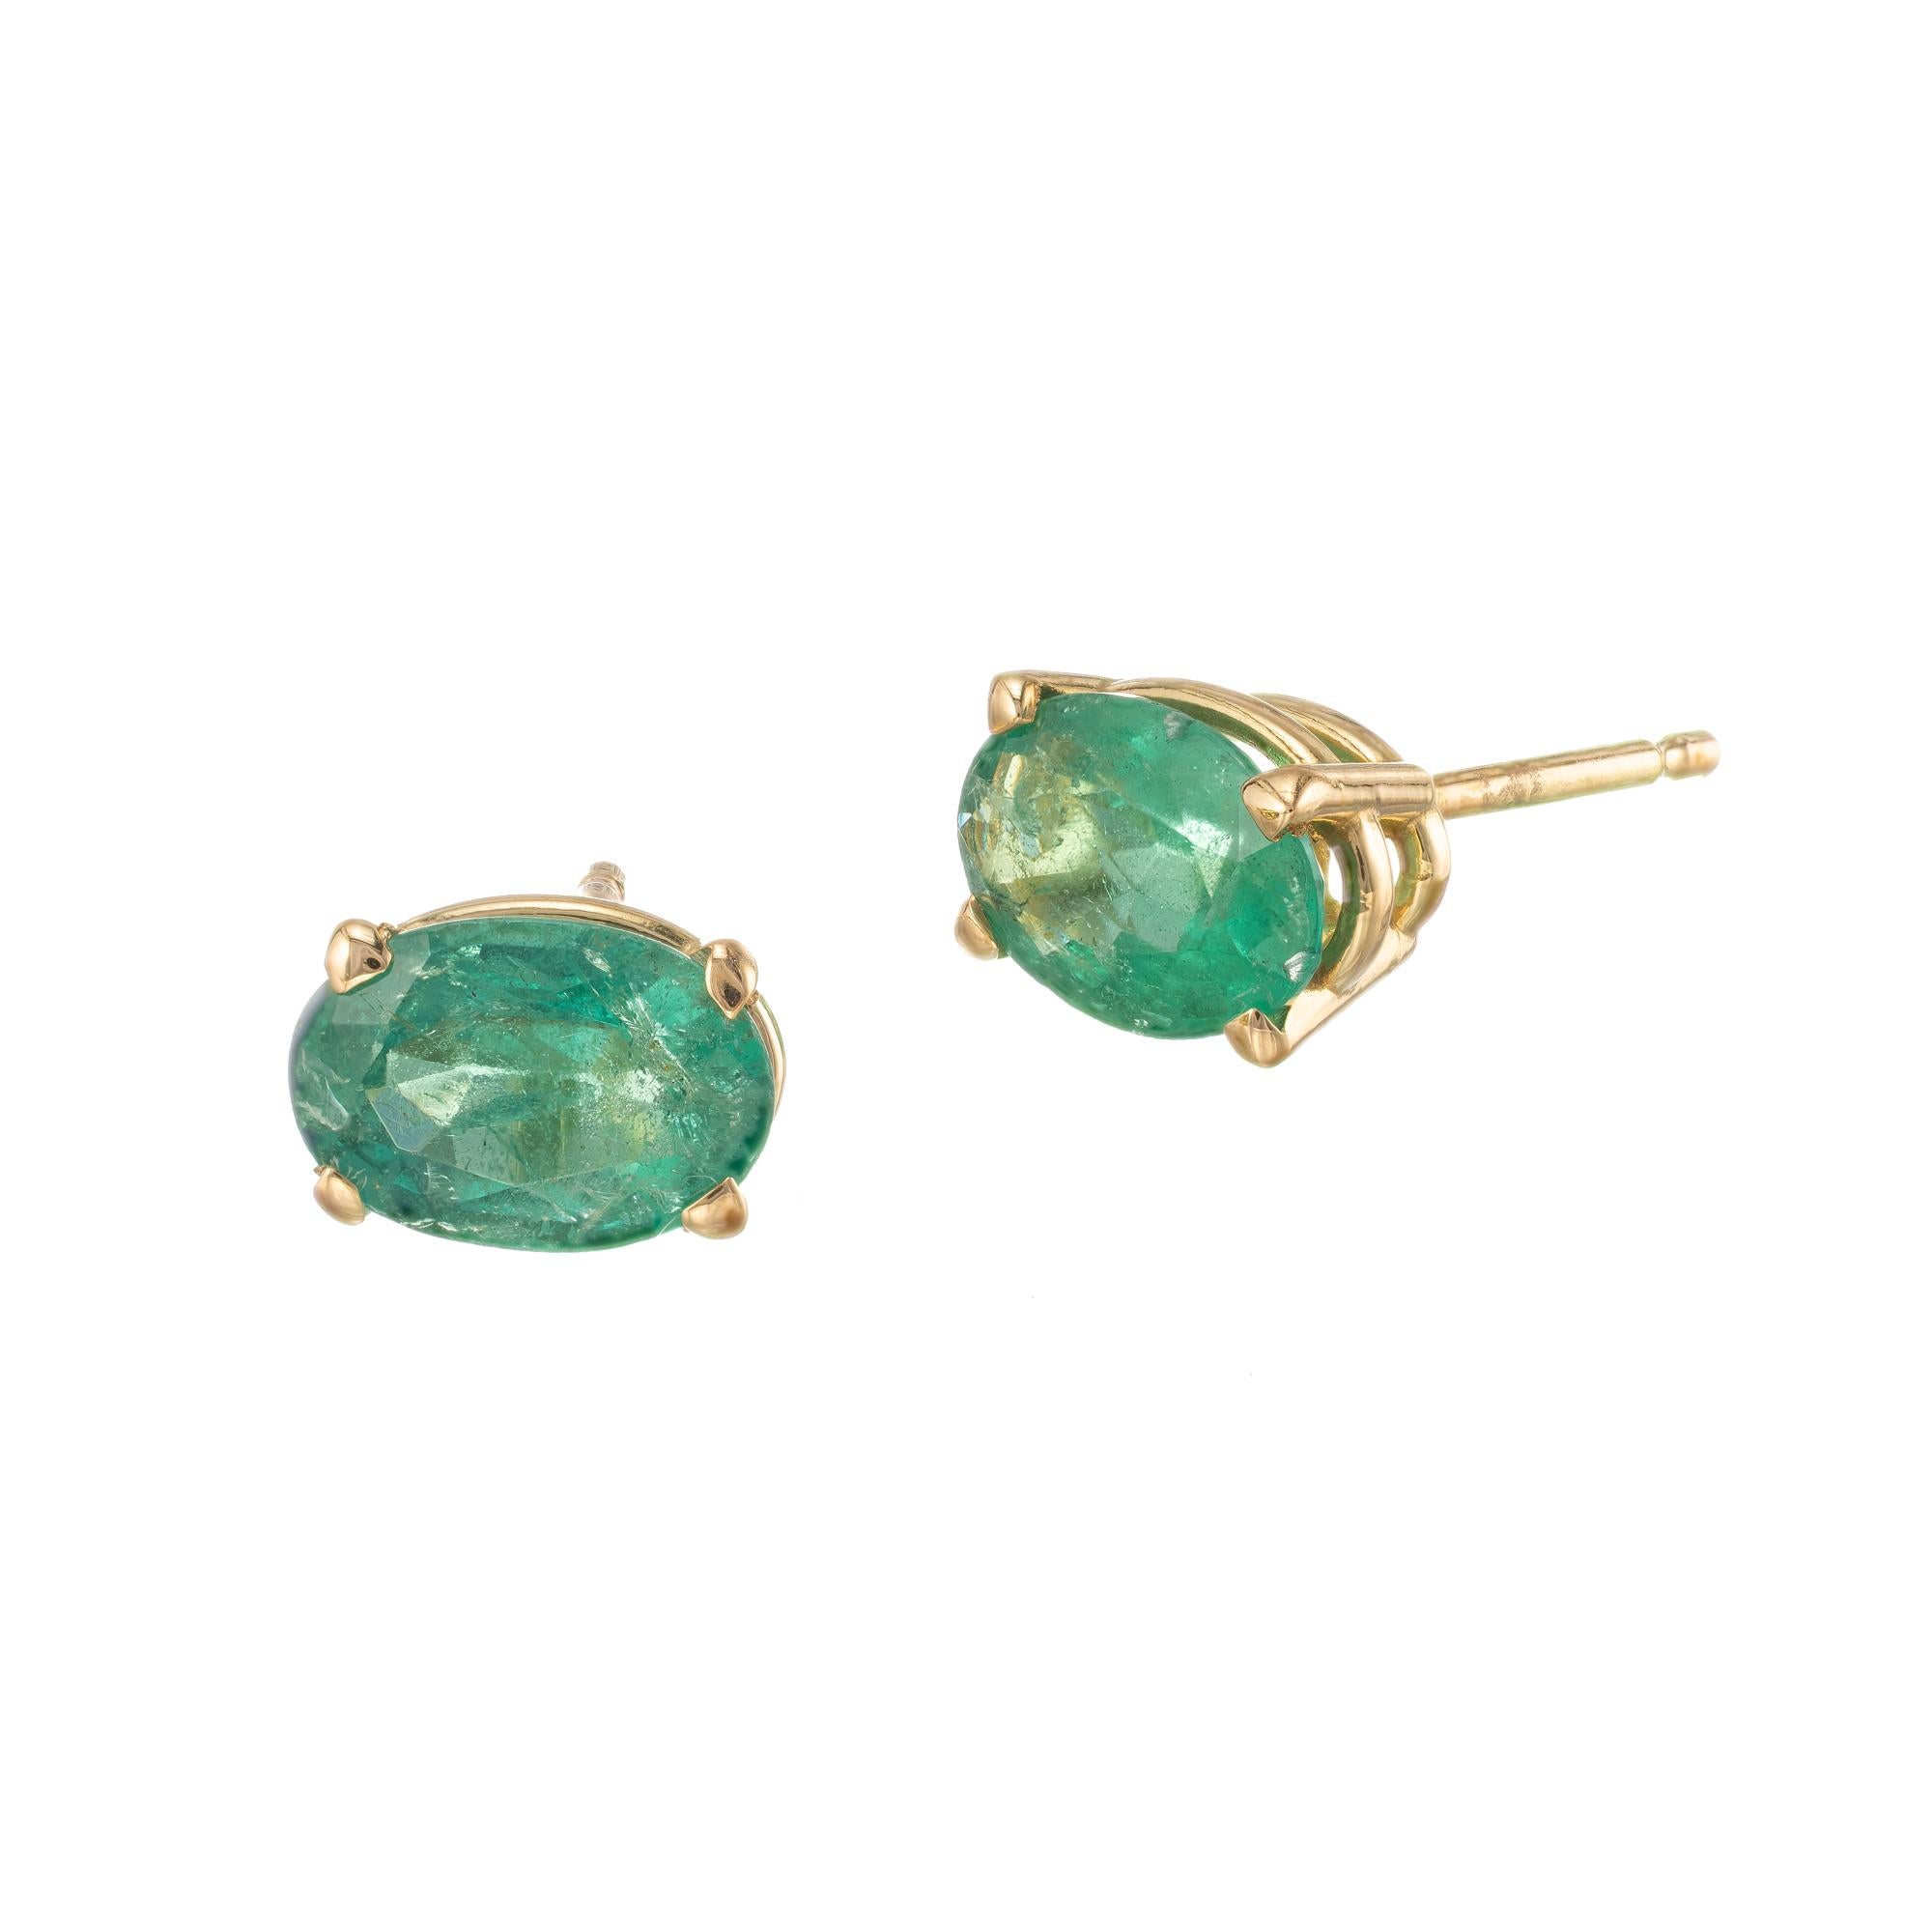 Natural GIA Certified Oval Emerald stud earrings. Minor to moderate clarity enhancements only. 

1 oval green F1 Emerald, Approximate .64ct GIA Certificate # 2201044667
1 oval green F2 Emerald, Approximate .59ct GIA Certificate # 1206044674
18k